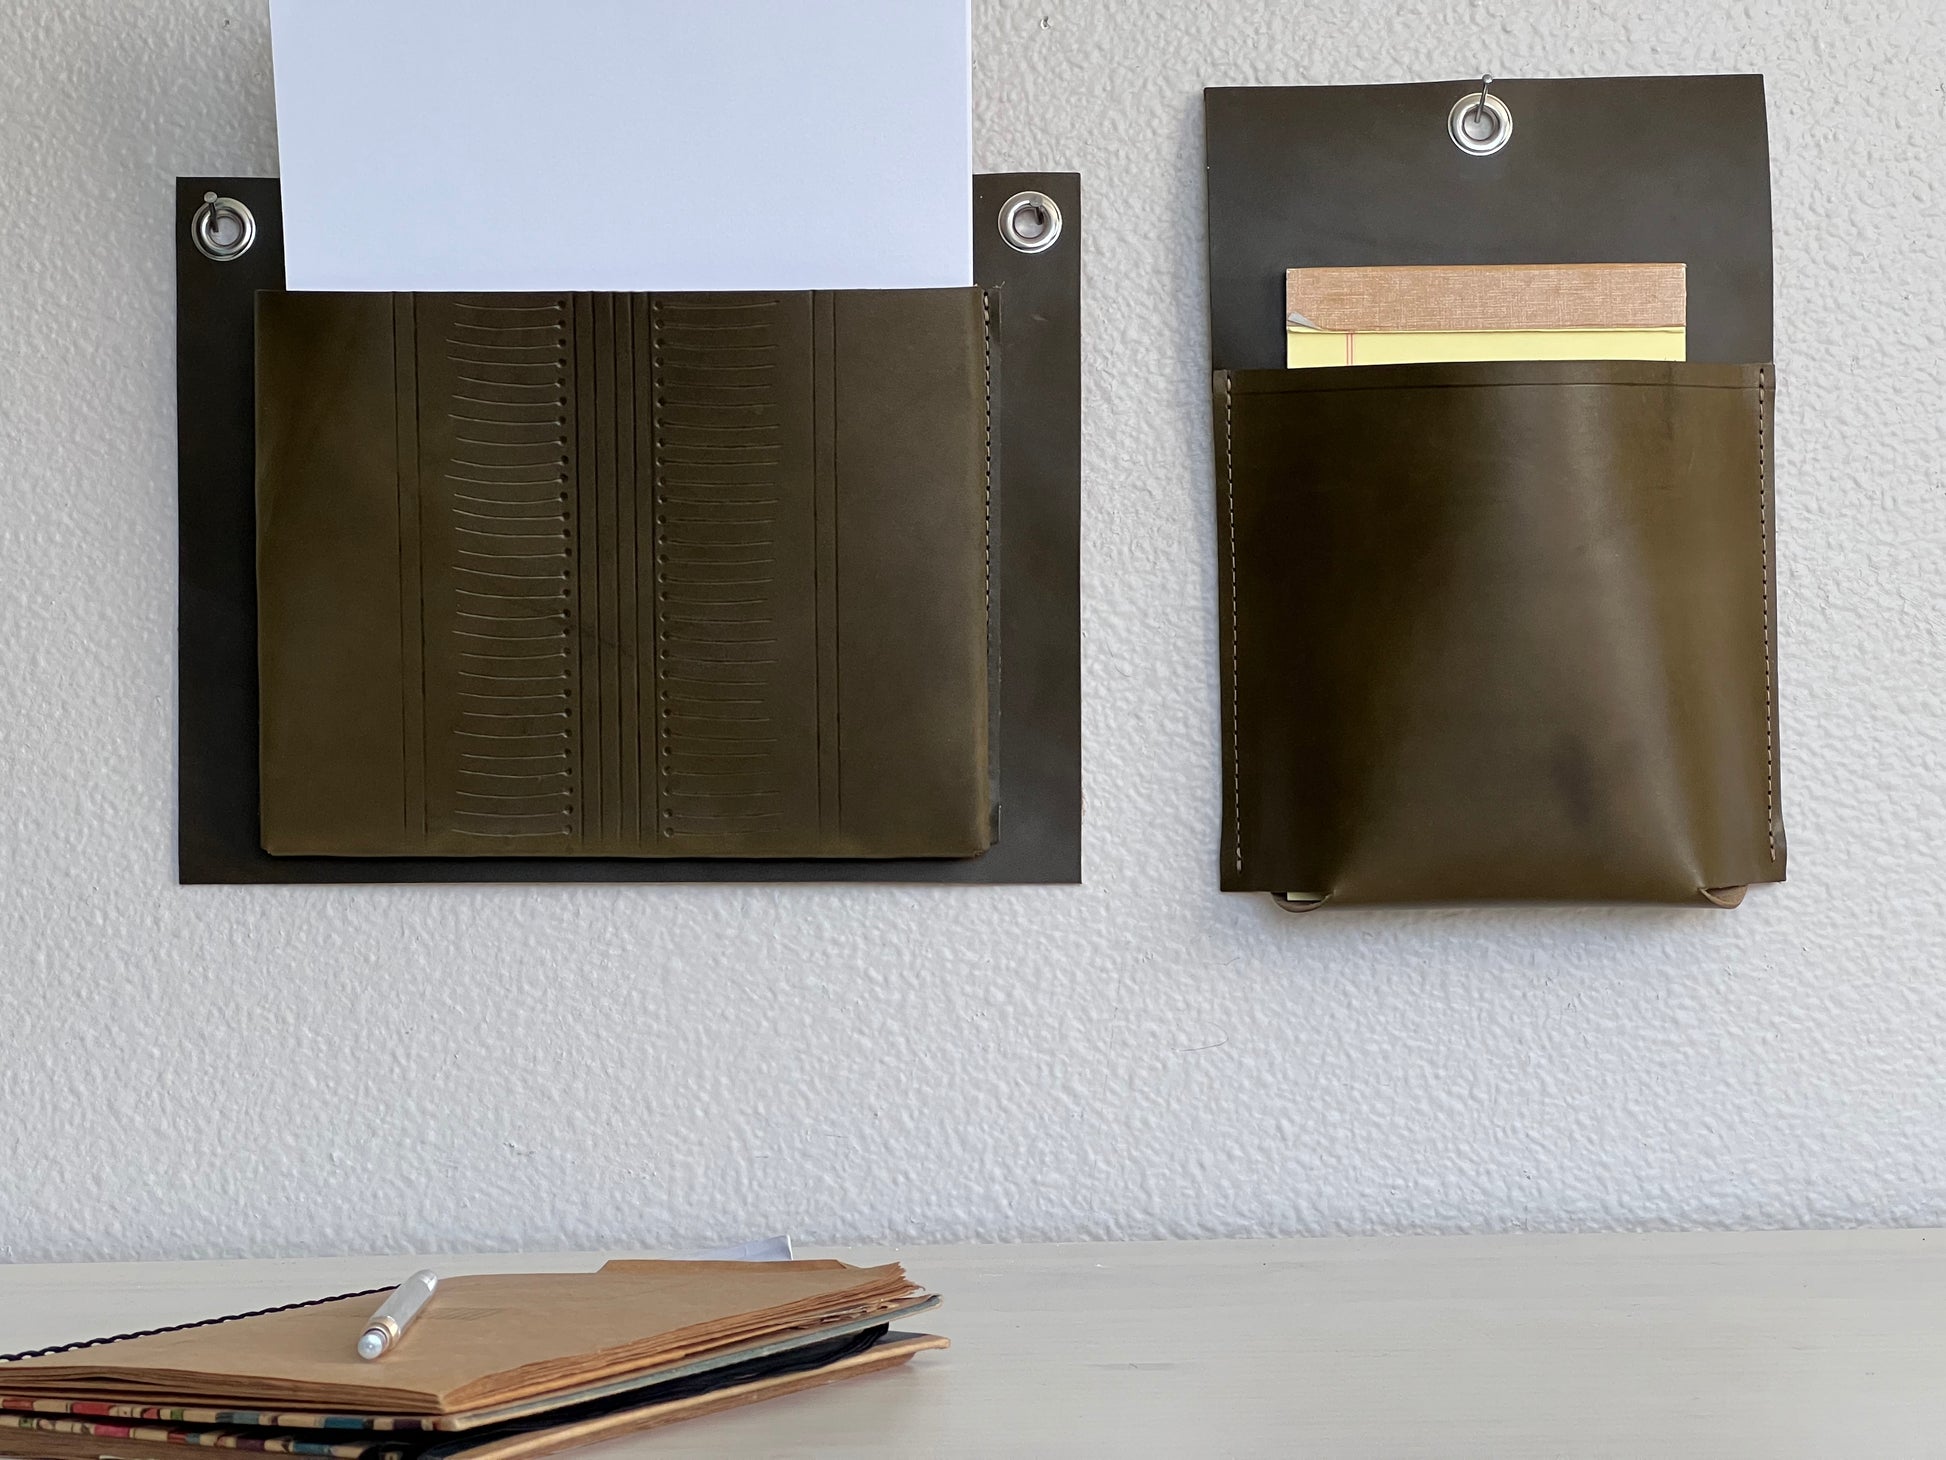 Olive green leather wall pockets hold paper above desk.